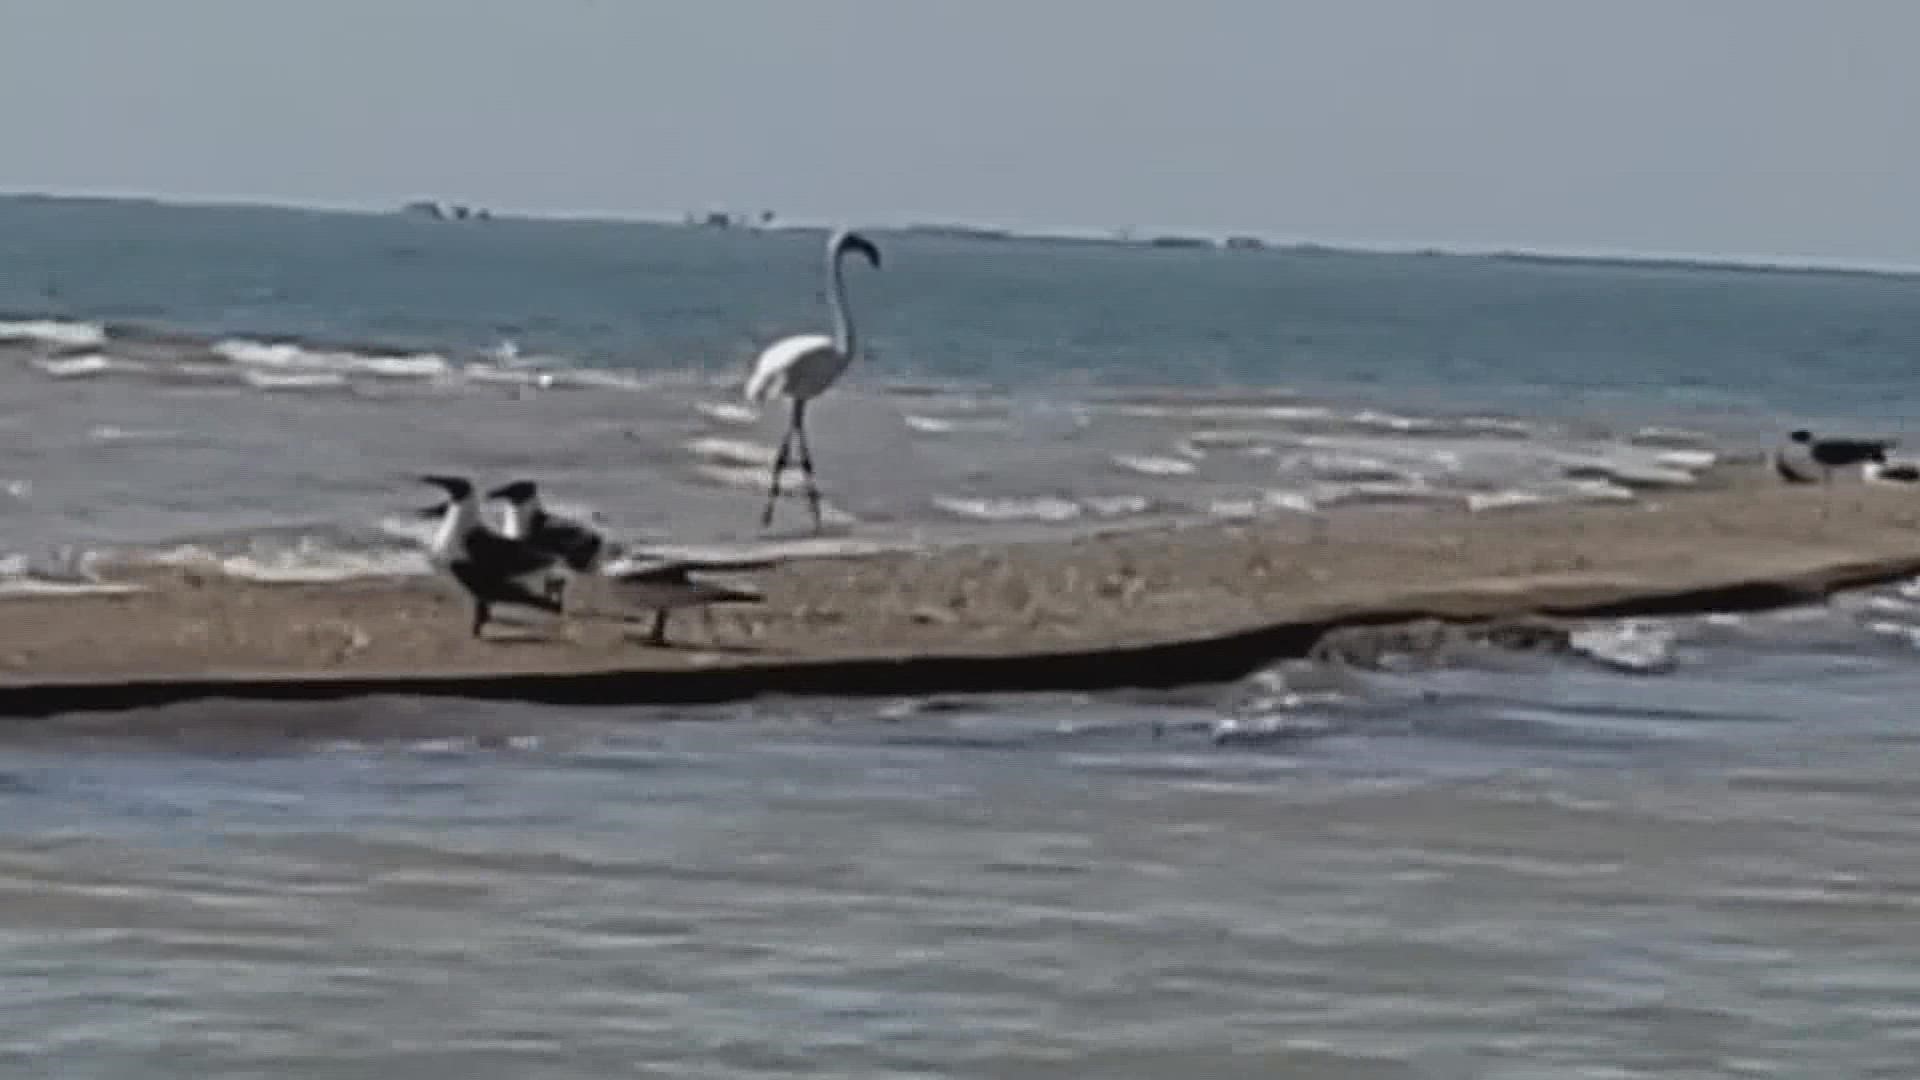 Flamingo No. 492 was captured on video shot on March 10 by an environmental activist near Port Lavaca, Texas, at Rhodes Point in Cox Bay.